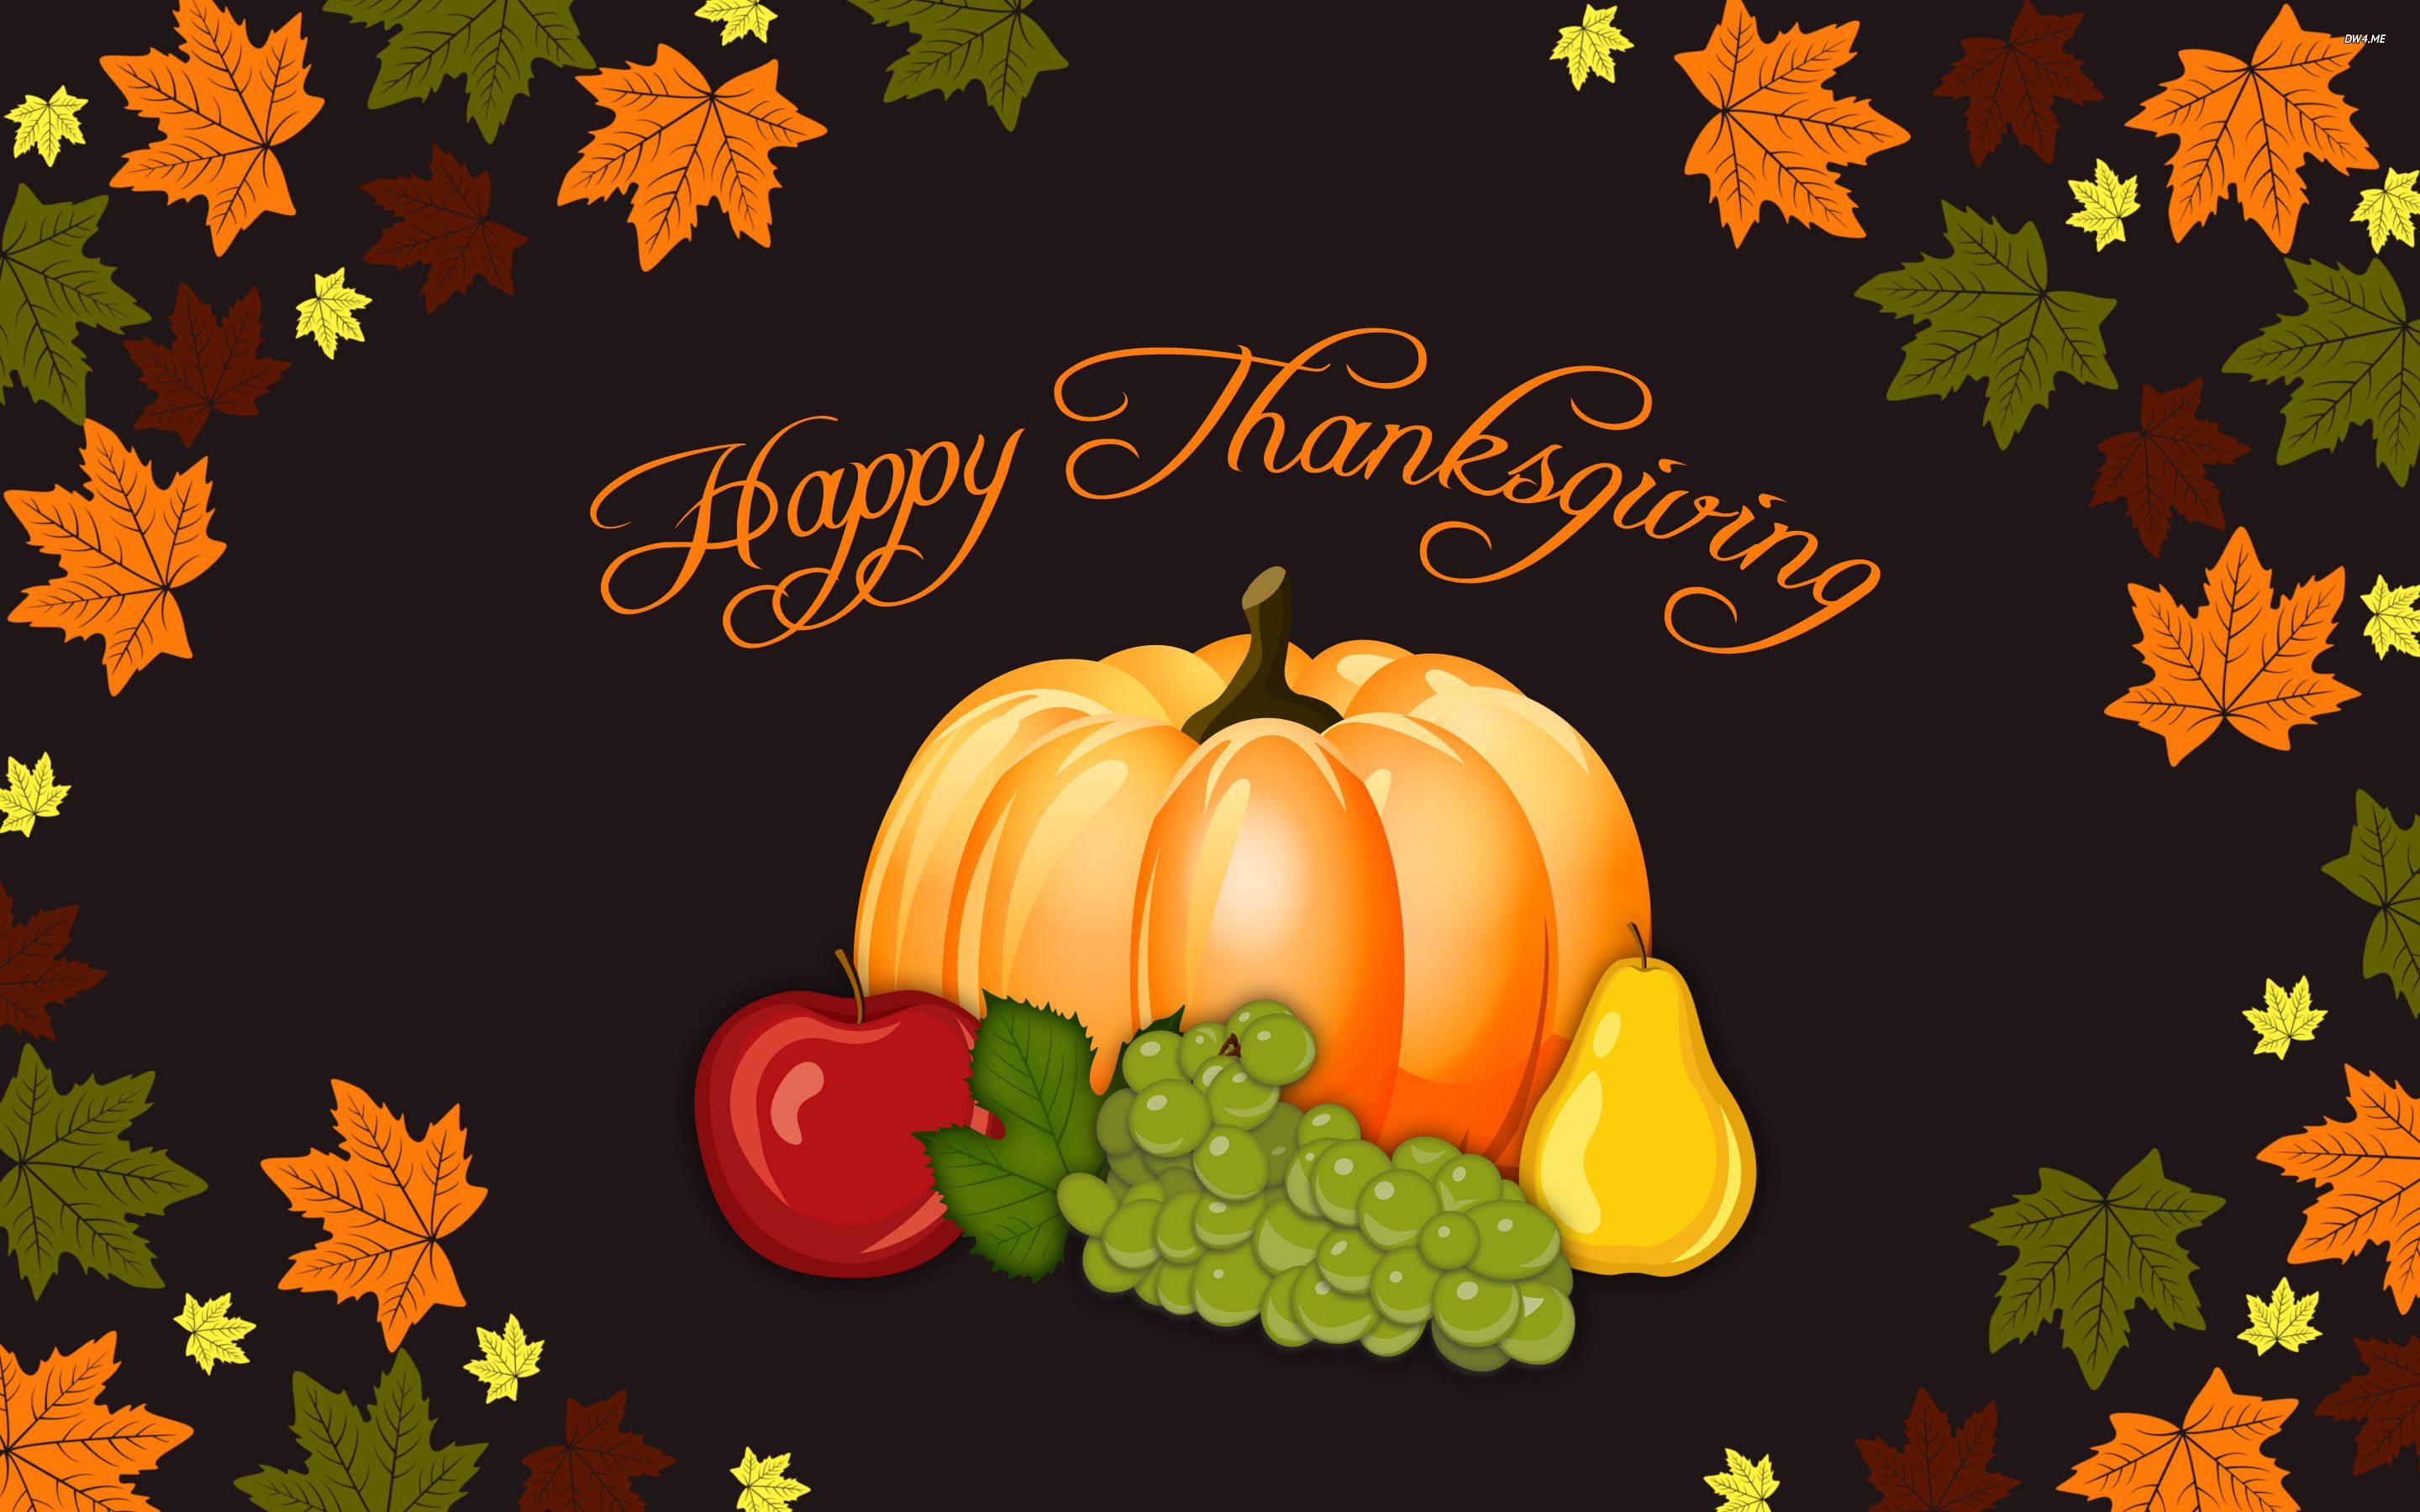 Download the Best Thanksgiving Wallpapers 2015 for Mobile, Mac and PC